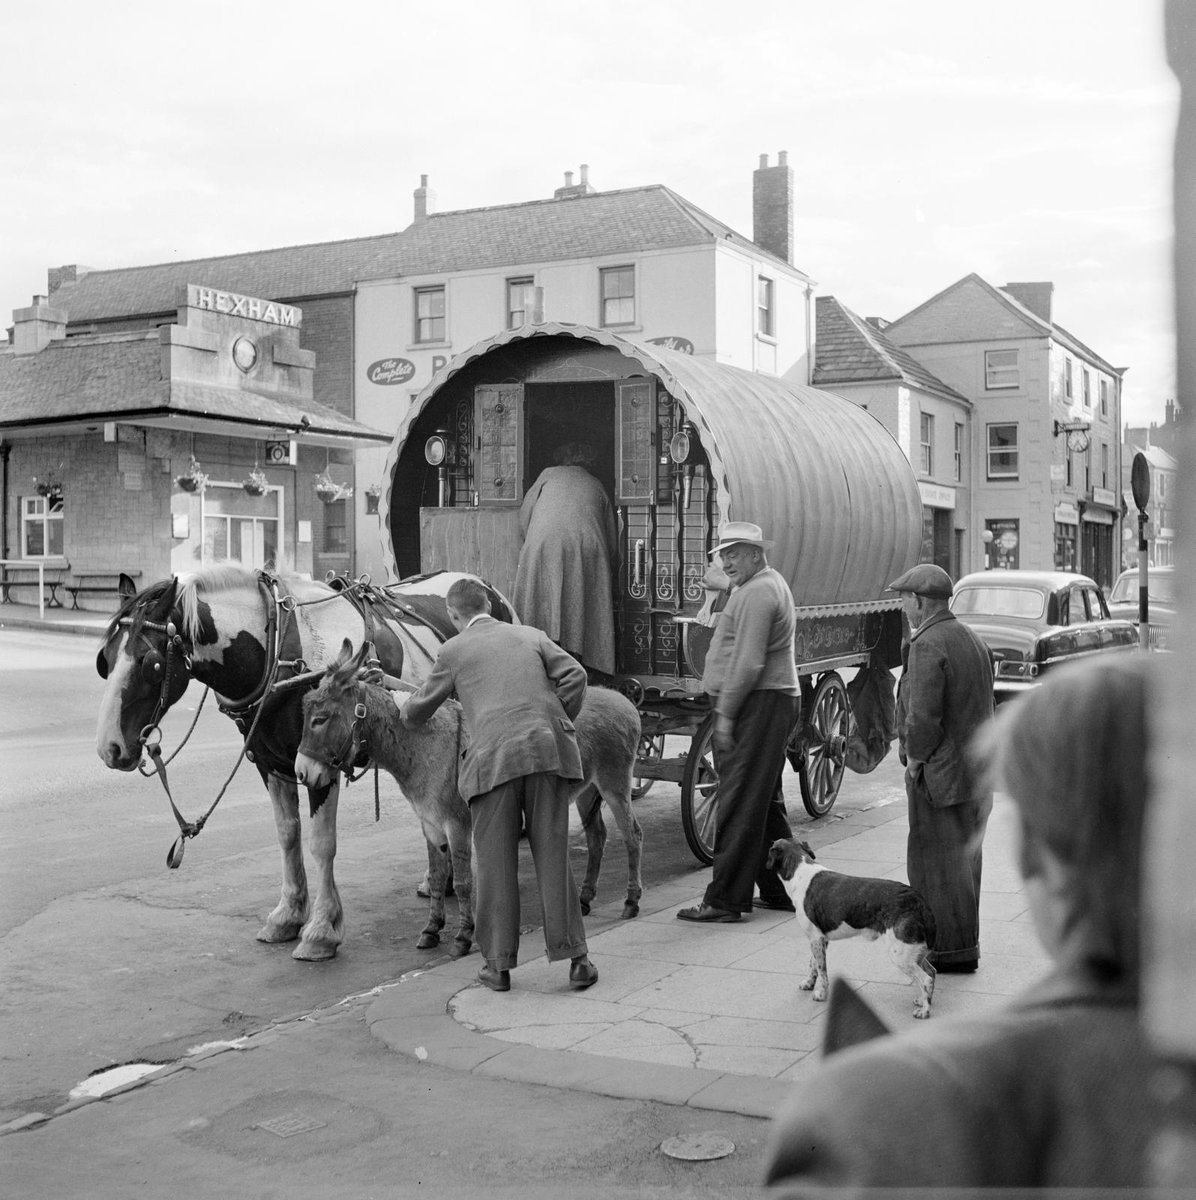 Did you know that June is Gypsy, Roma & Traveller History Month? This 1950s image from @HE_Archive shows a caravan on Hexham's high street, in the High Street HAZ area. 

This year's #GRTHM theme is
#MakeSomeSpace 
Get involved here: bit.ly/356gzST